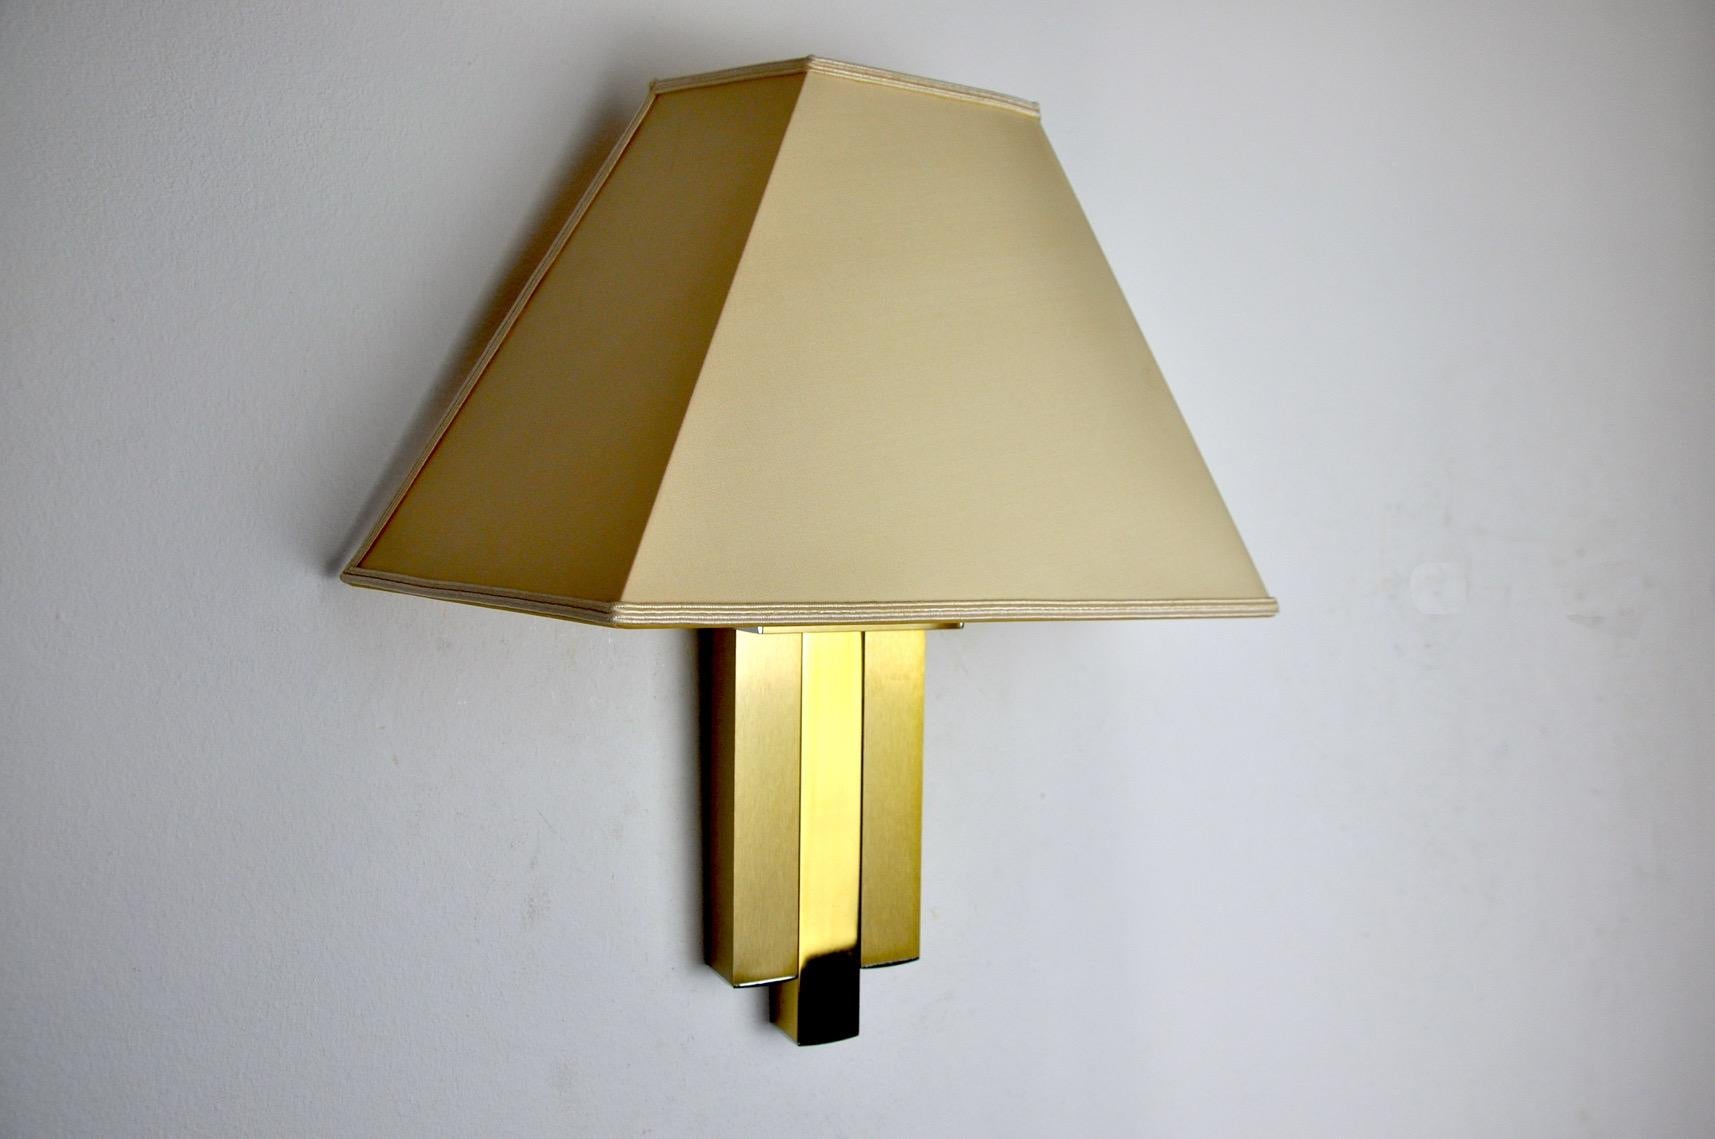 Spanish Regency Wall Lamp by Lumica Spain 1970 For Sale